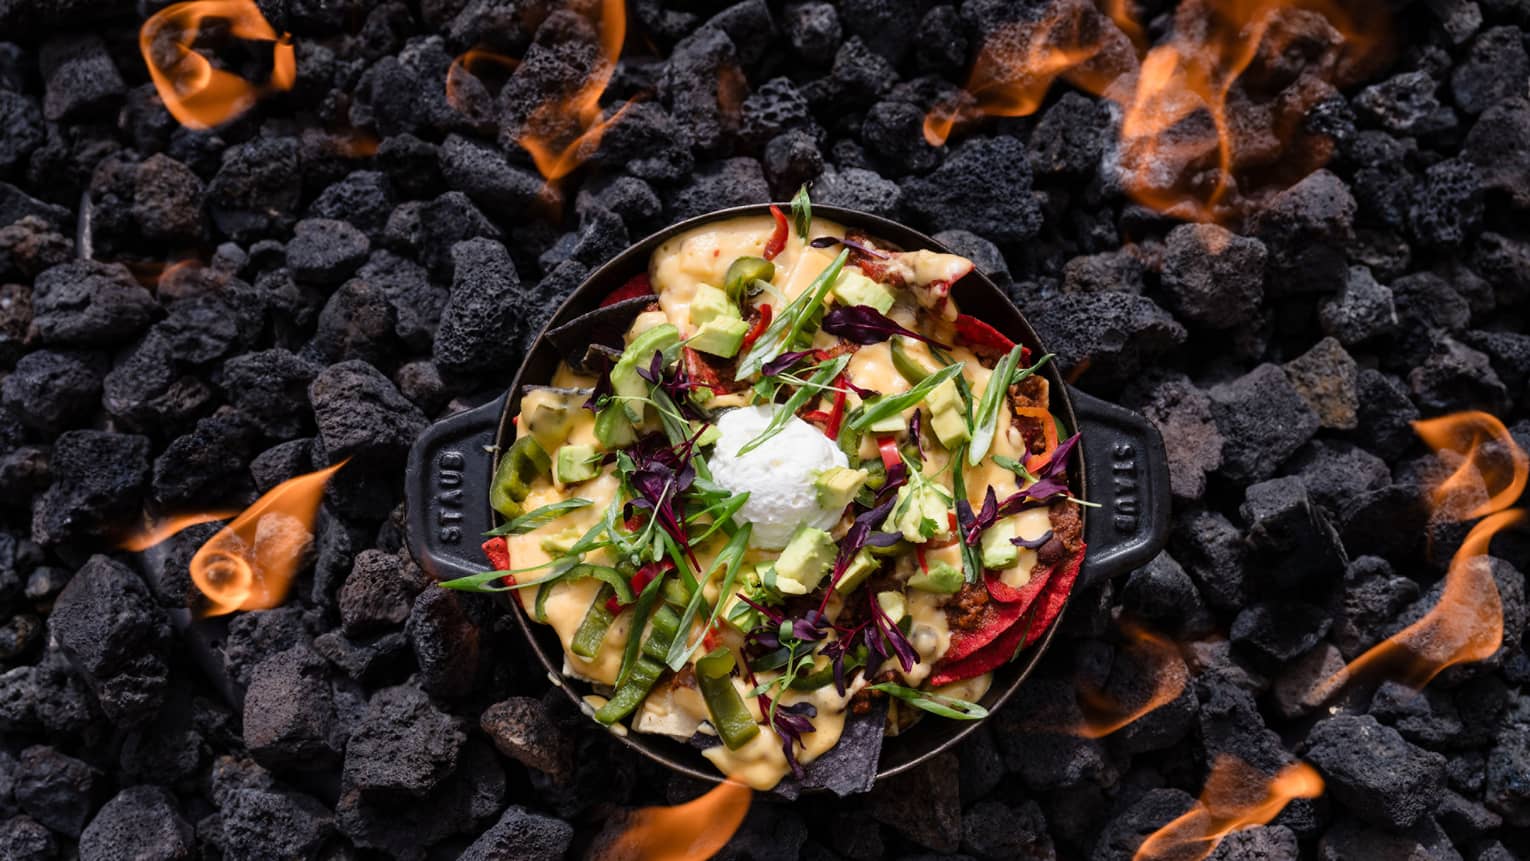 Dish with greens on charcoal with flames around it.